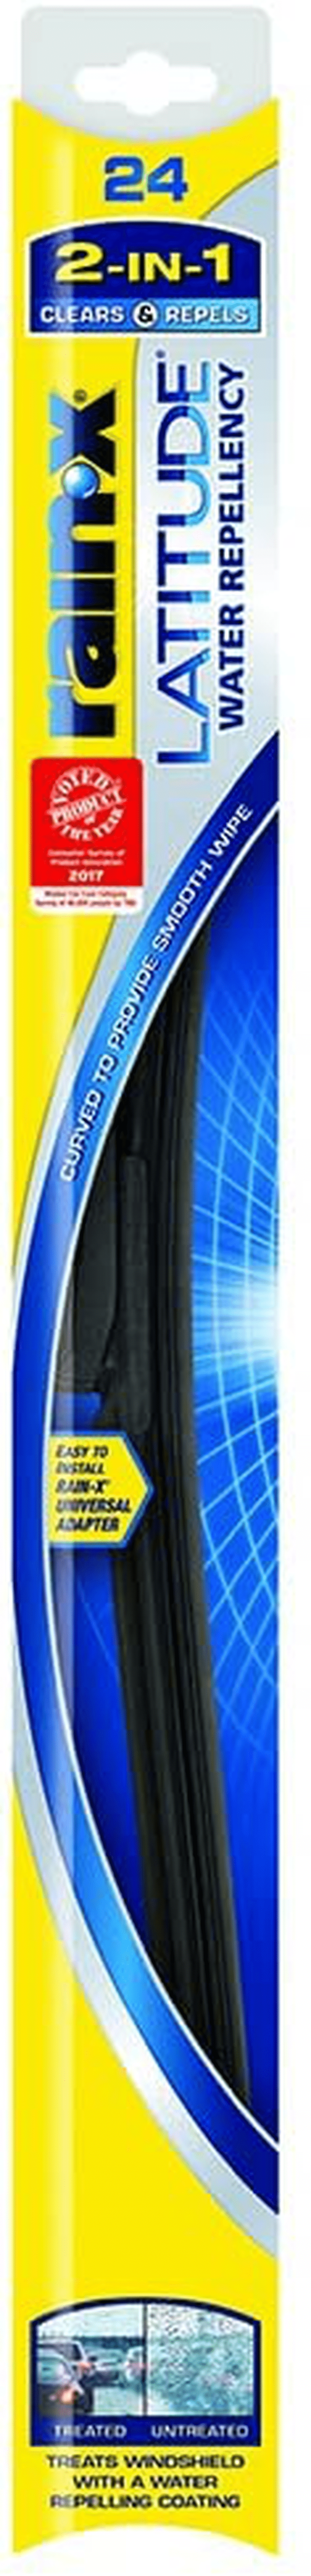 Rain-X - 810163 Latitude Water Repellency Wiper Blade Combo Pack 26" and 16" Vehicles & Parts > Vehicle Parts & Accessories > Motor Vehicle Parts Rain-X Pack of 1 24" 